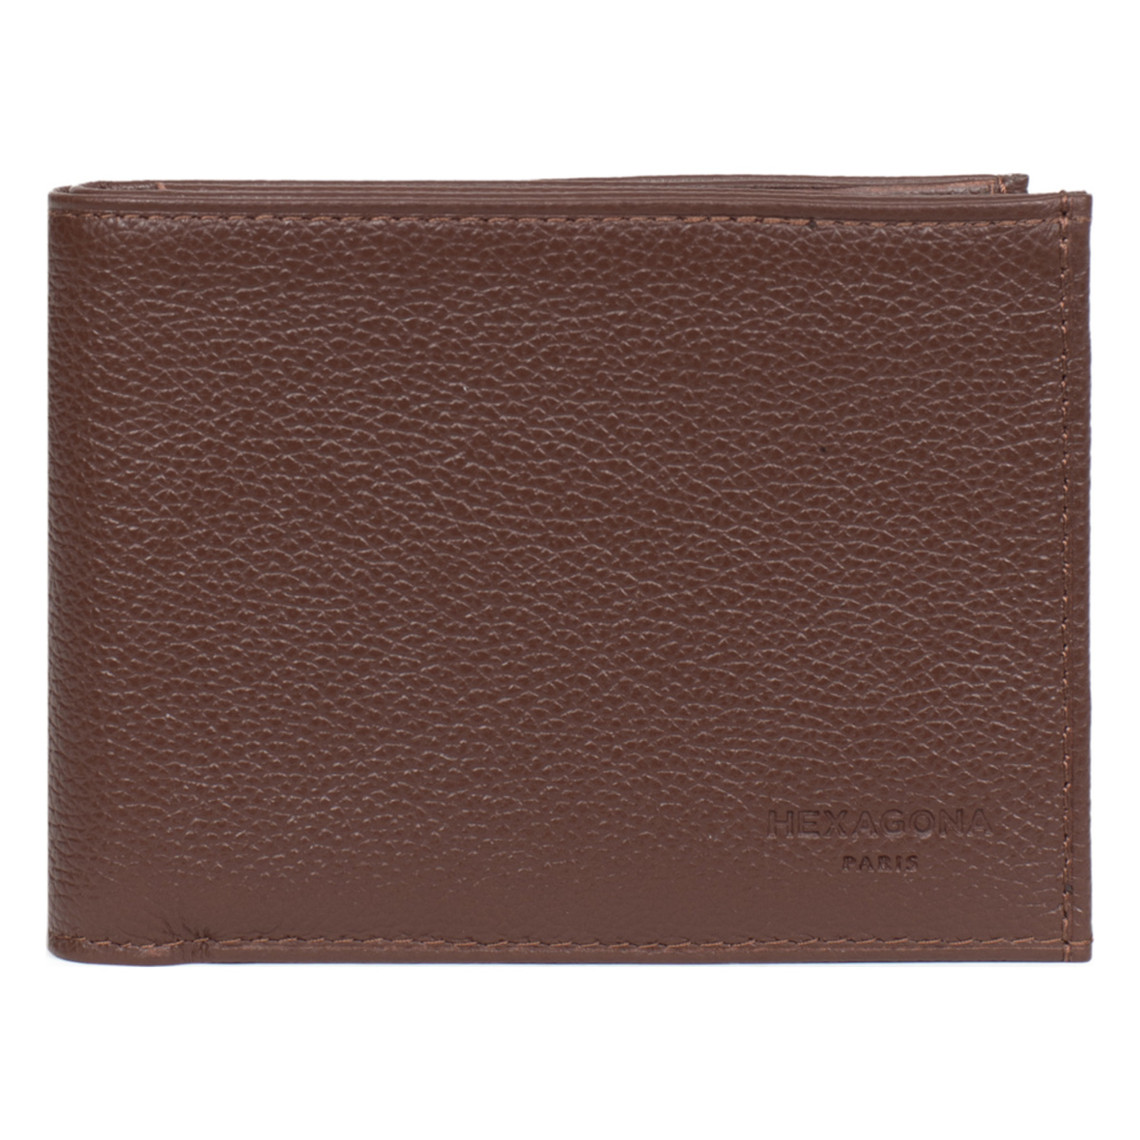 Portefeuille italien Cuir CONFORT Chocolat Ruby